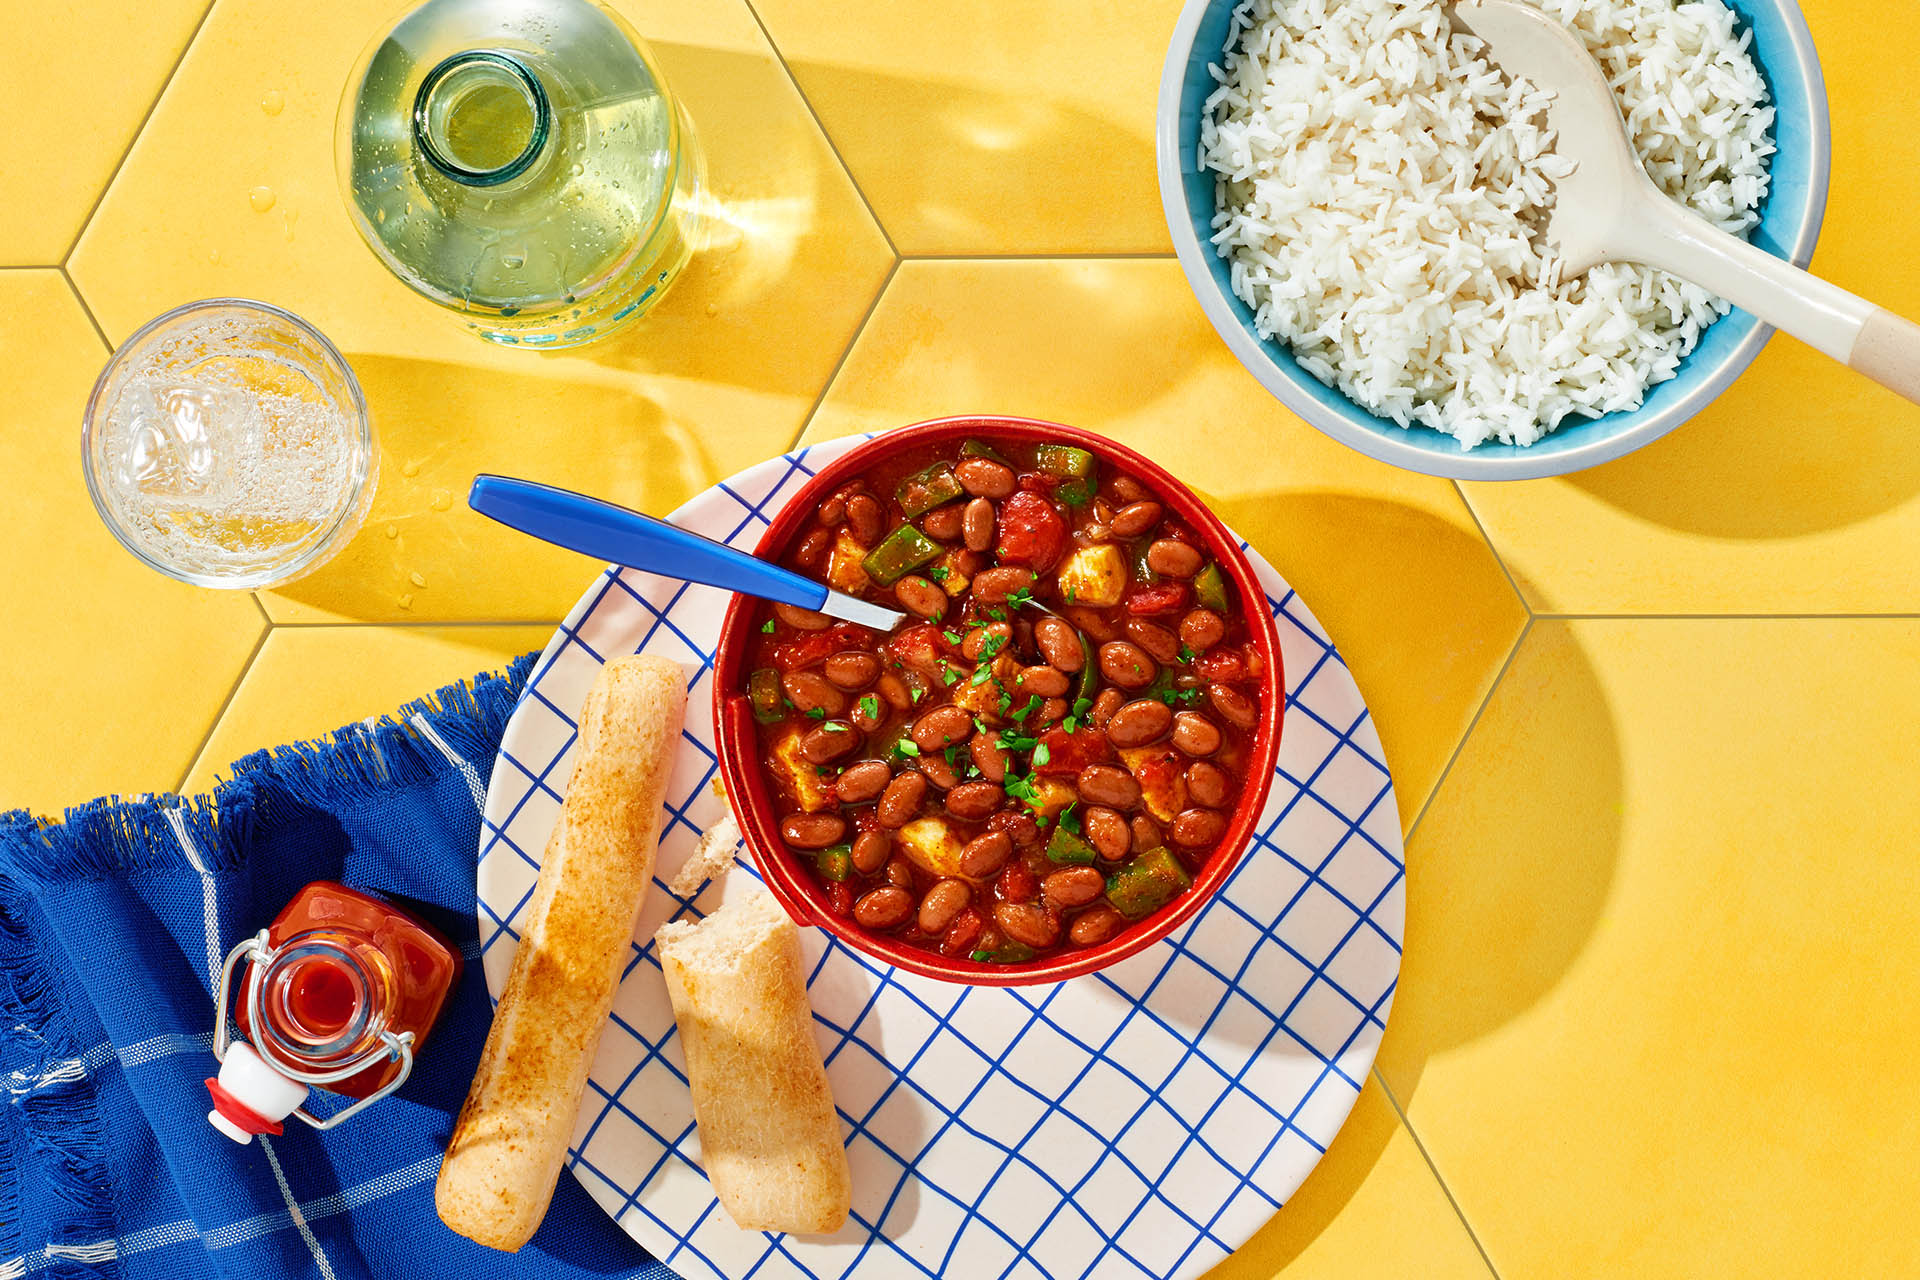 Red bowl of Hot Pepper Chicken Chili atop a yellow tile table with a side of rice and breadsticks.